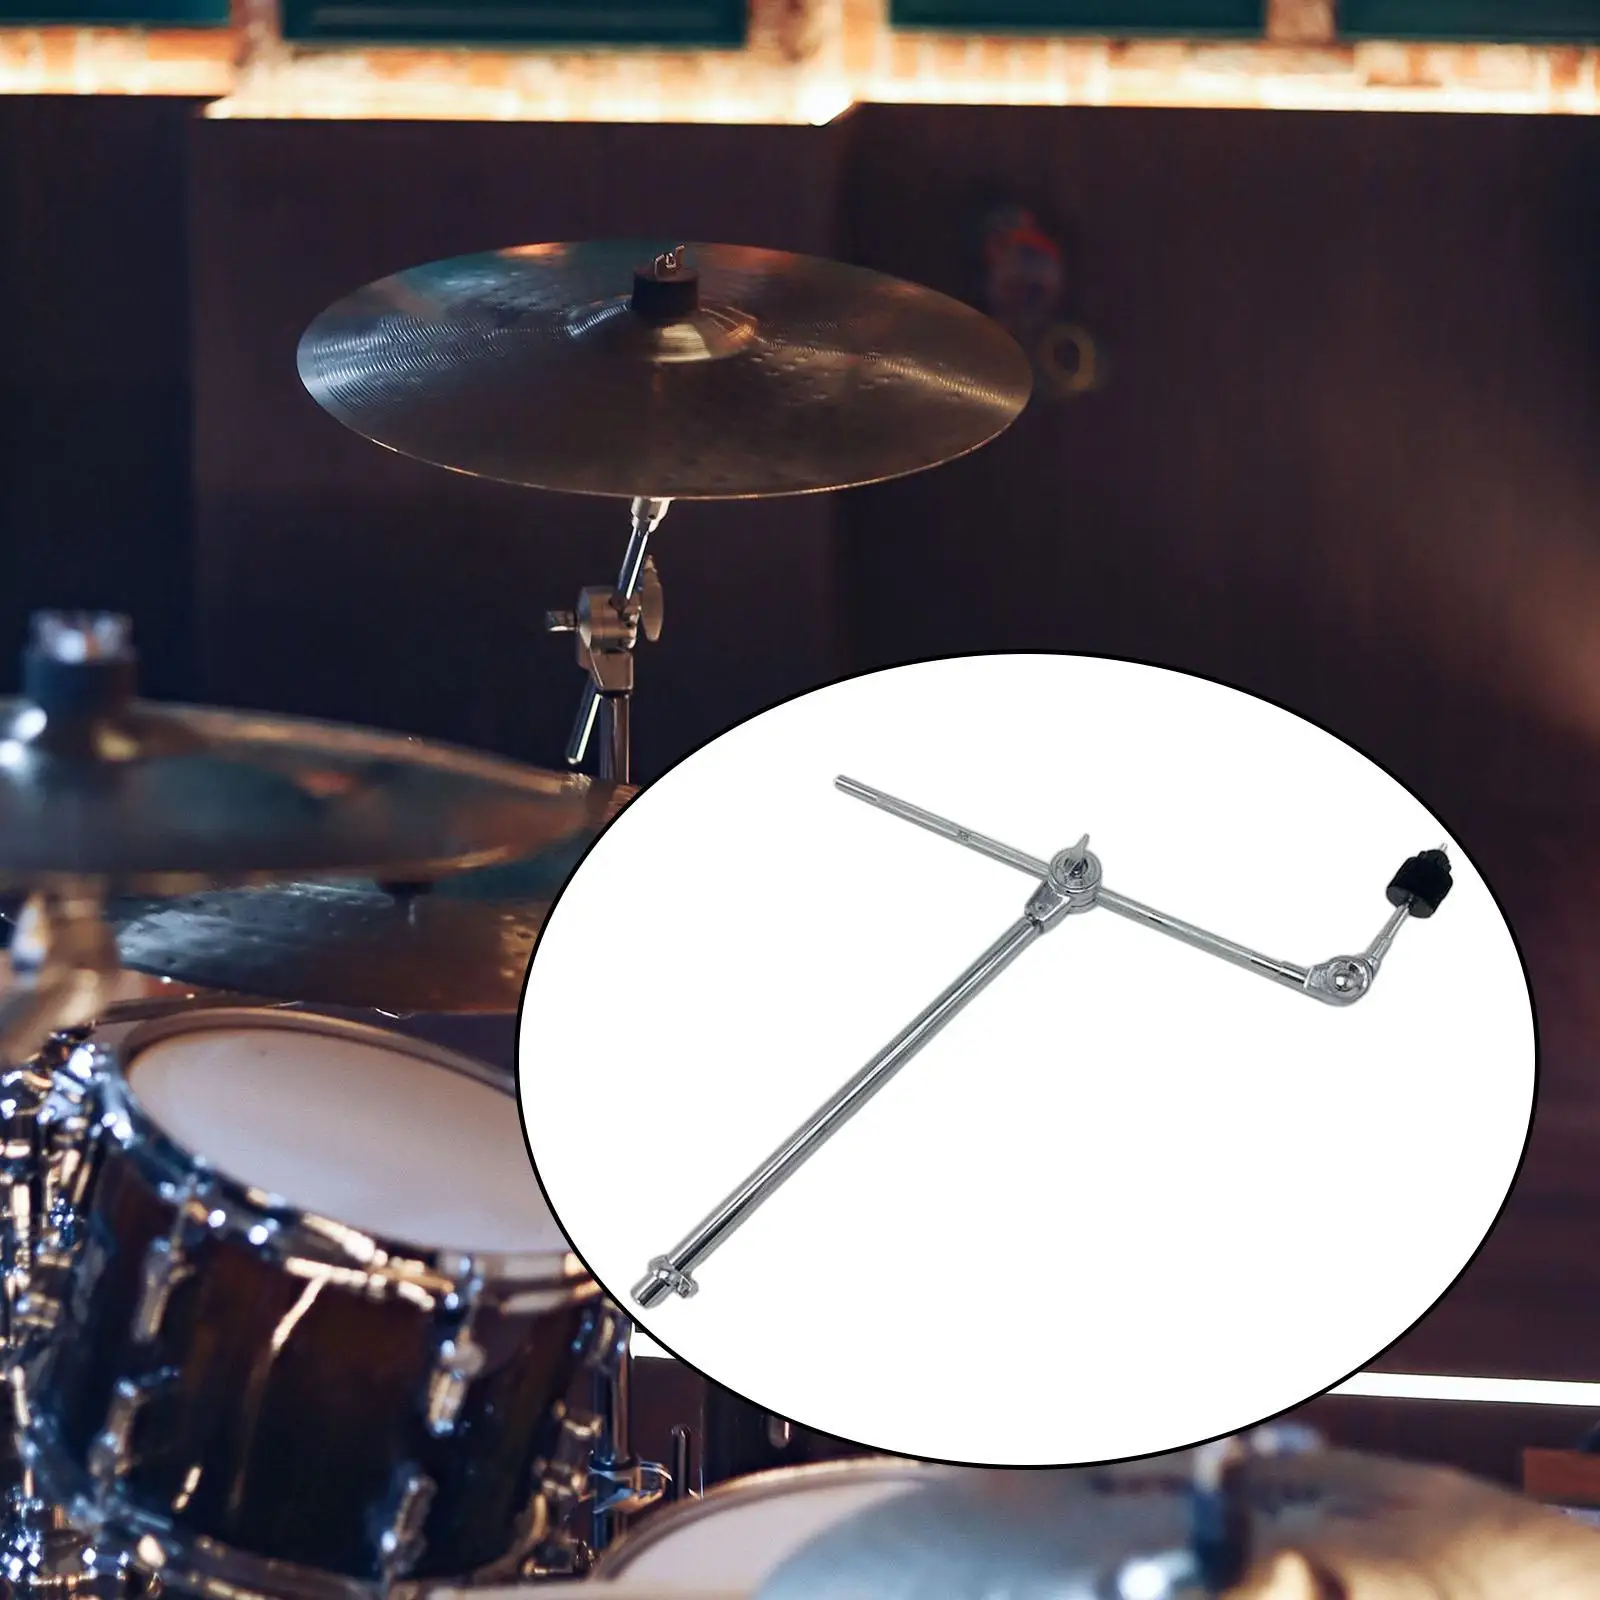 Cymbal Boom Holder Single Locking Cymbal Arm Easily Installation Drum Parts Percussion Accessories Sturdy Clamp Mount Attachment